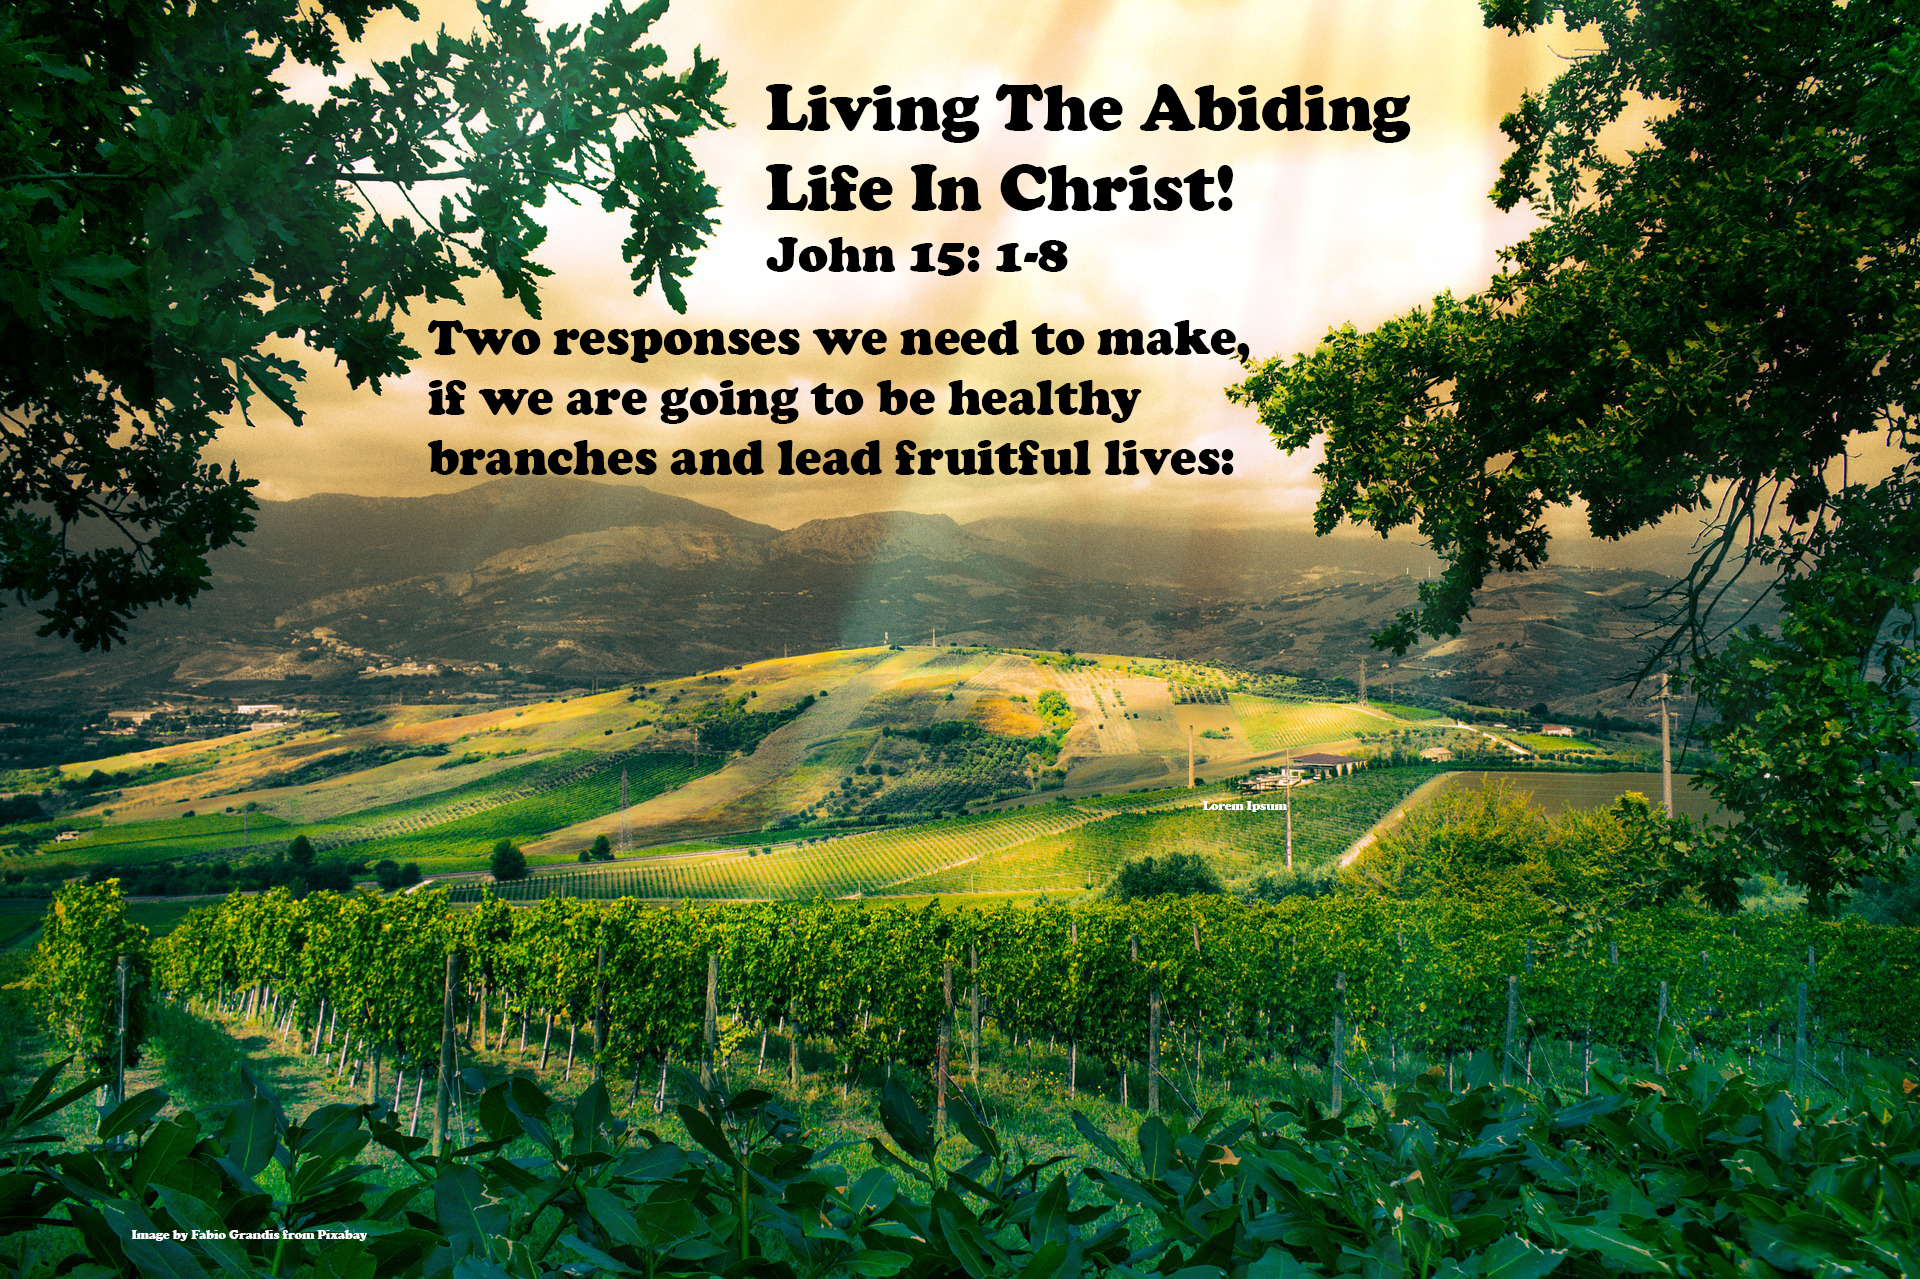 Living The Abiding Life In Christ!